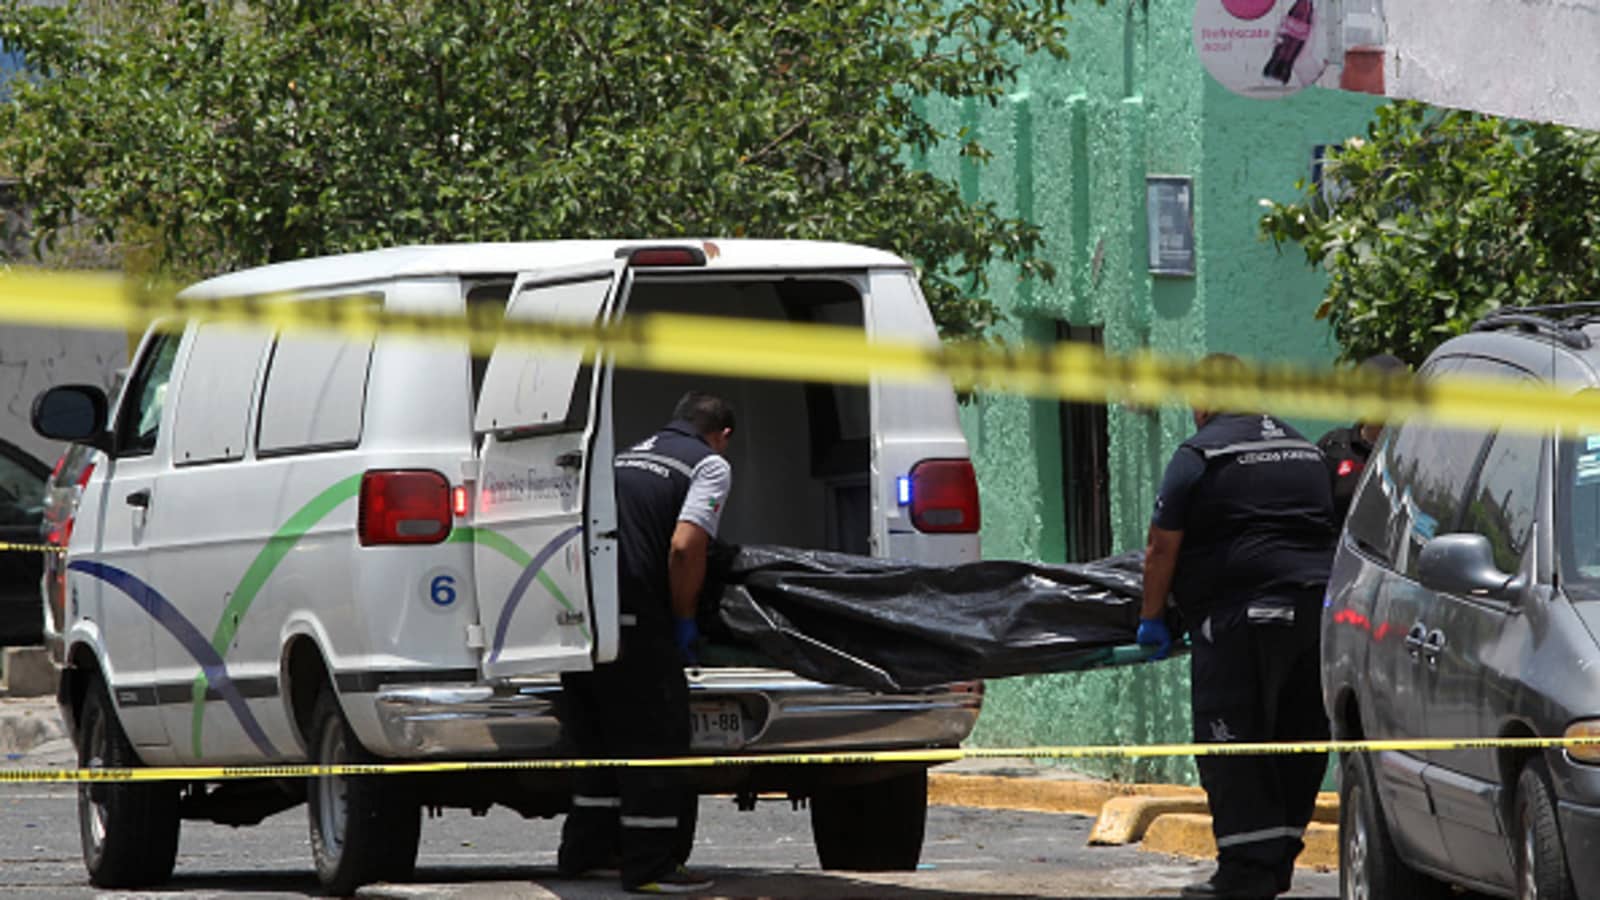 More than 100 politicians murdered in Mexico ahead of election